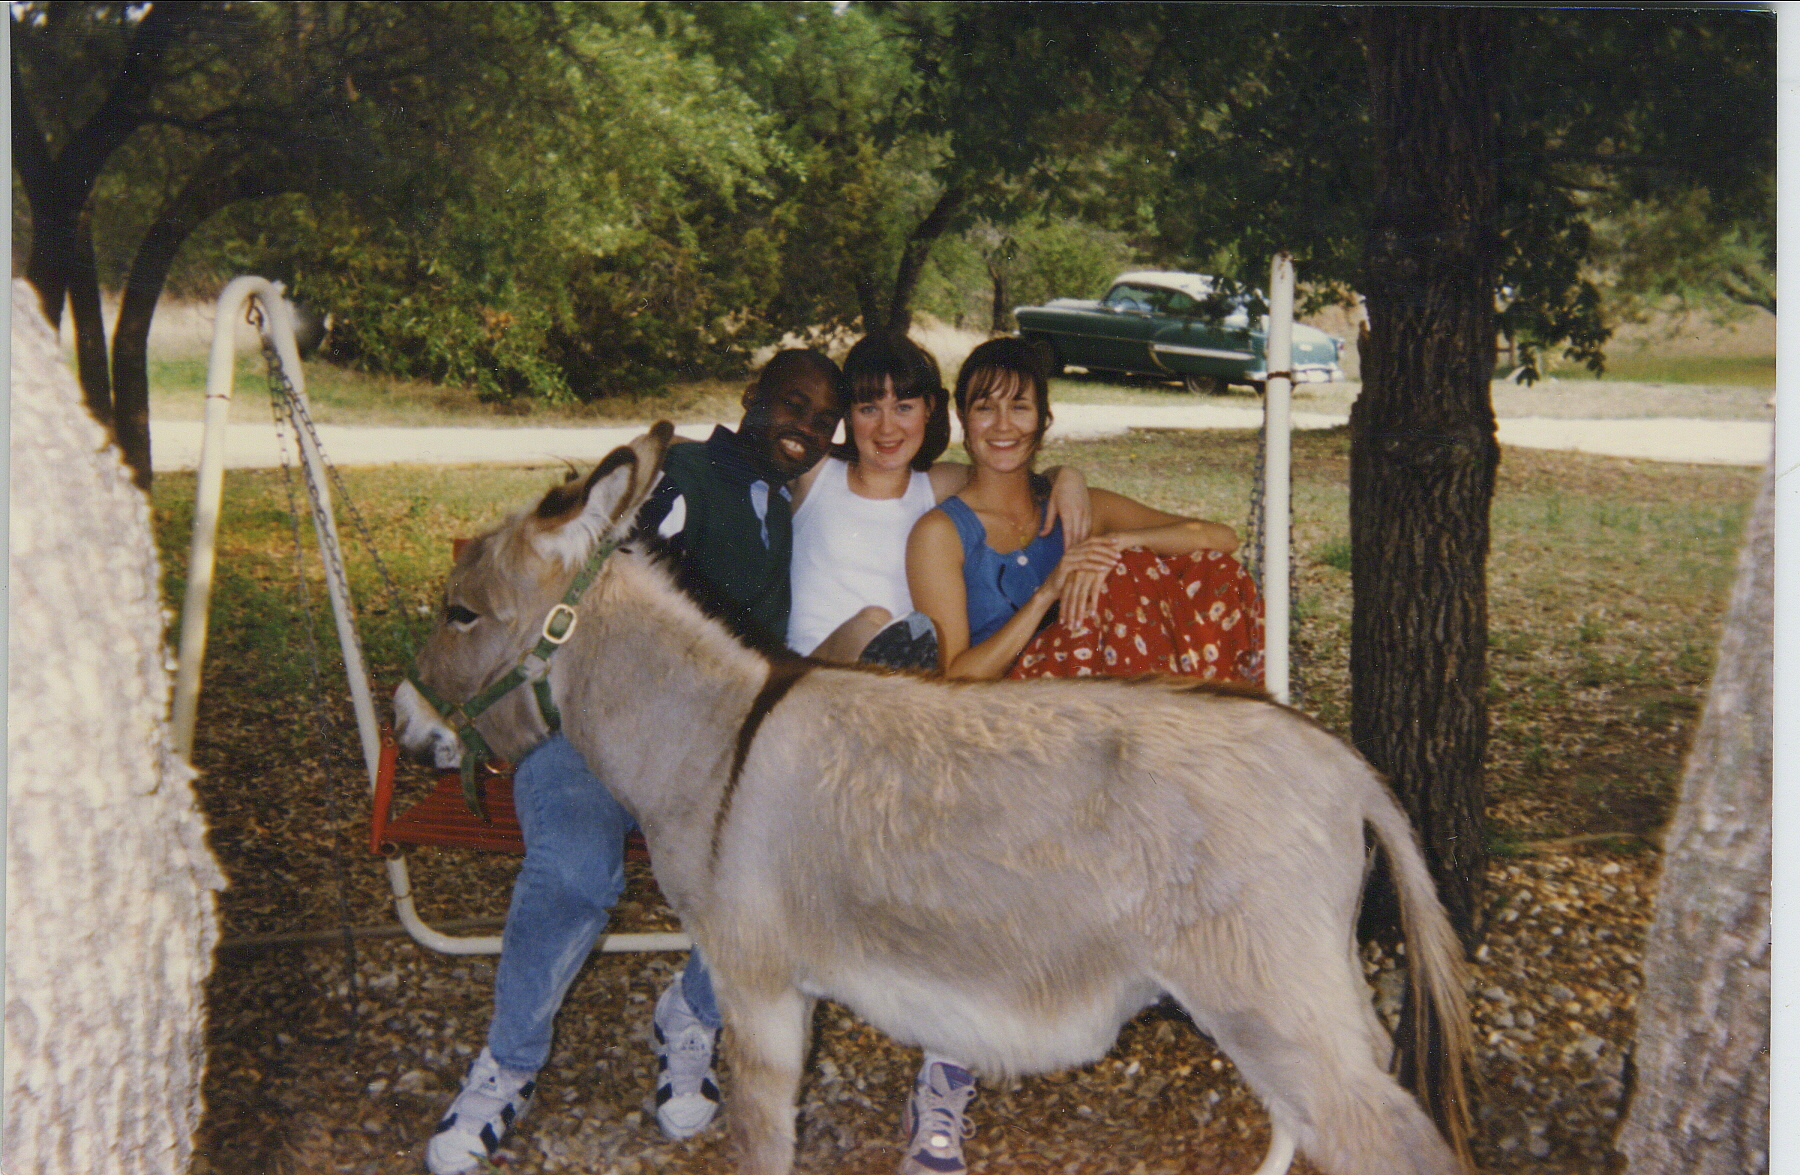   During the early 1990s, I was in a long-distance relationship with a young woman (center) who lived in Austin, Texas. She took me to see her sister's family -- and their goat. I'm glad I got back alive!    